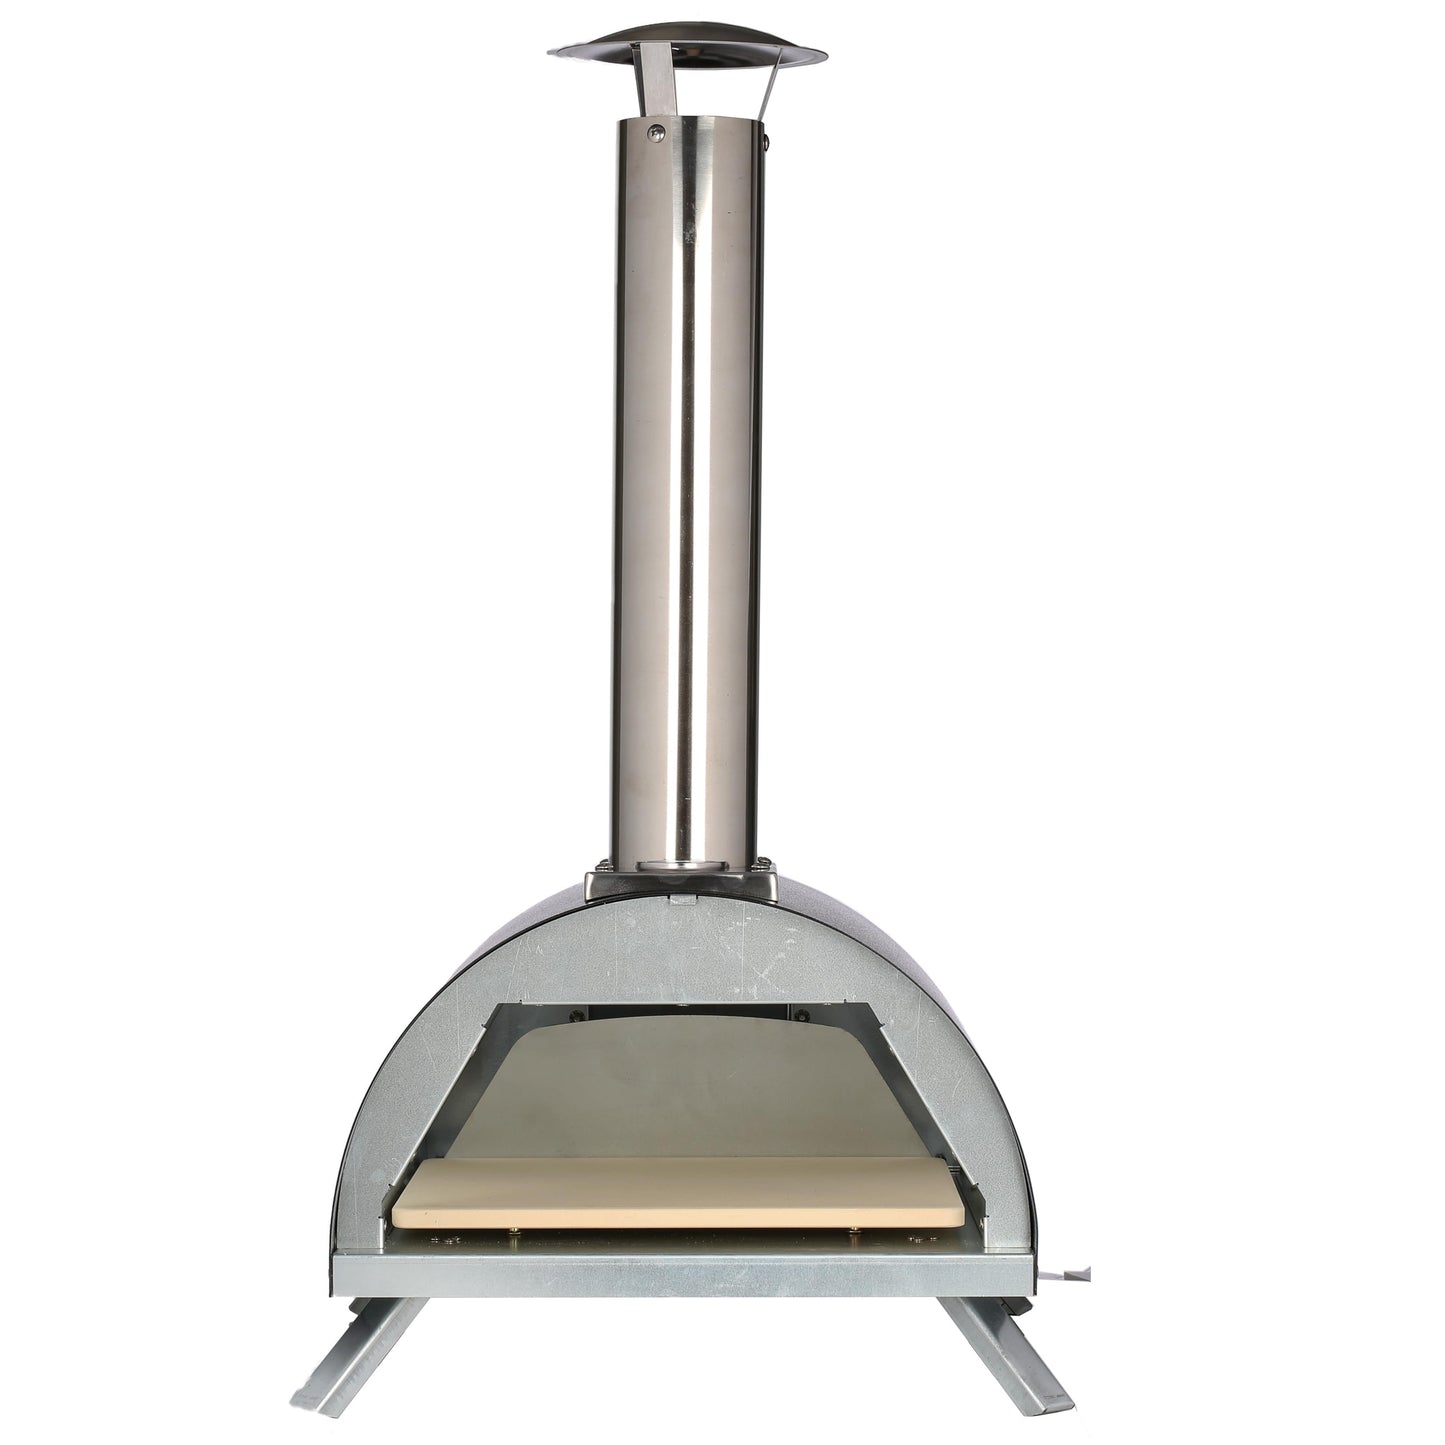 Le Peppe Portable Pizza Oven - SAVE 30%